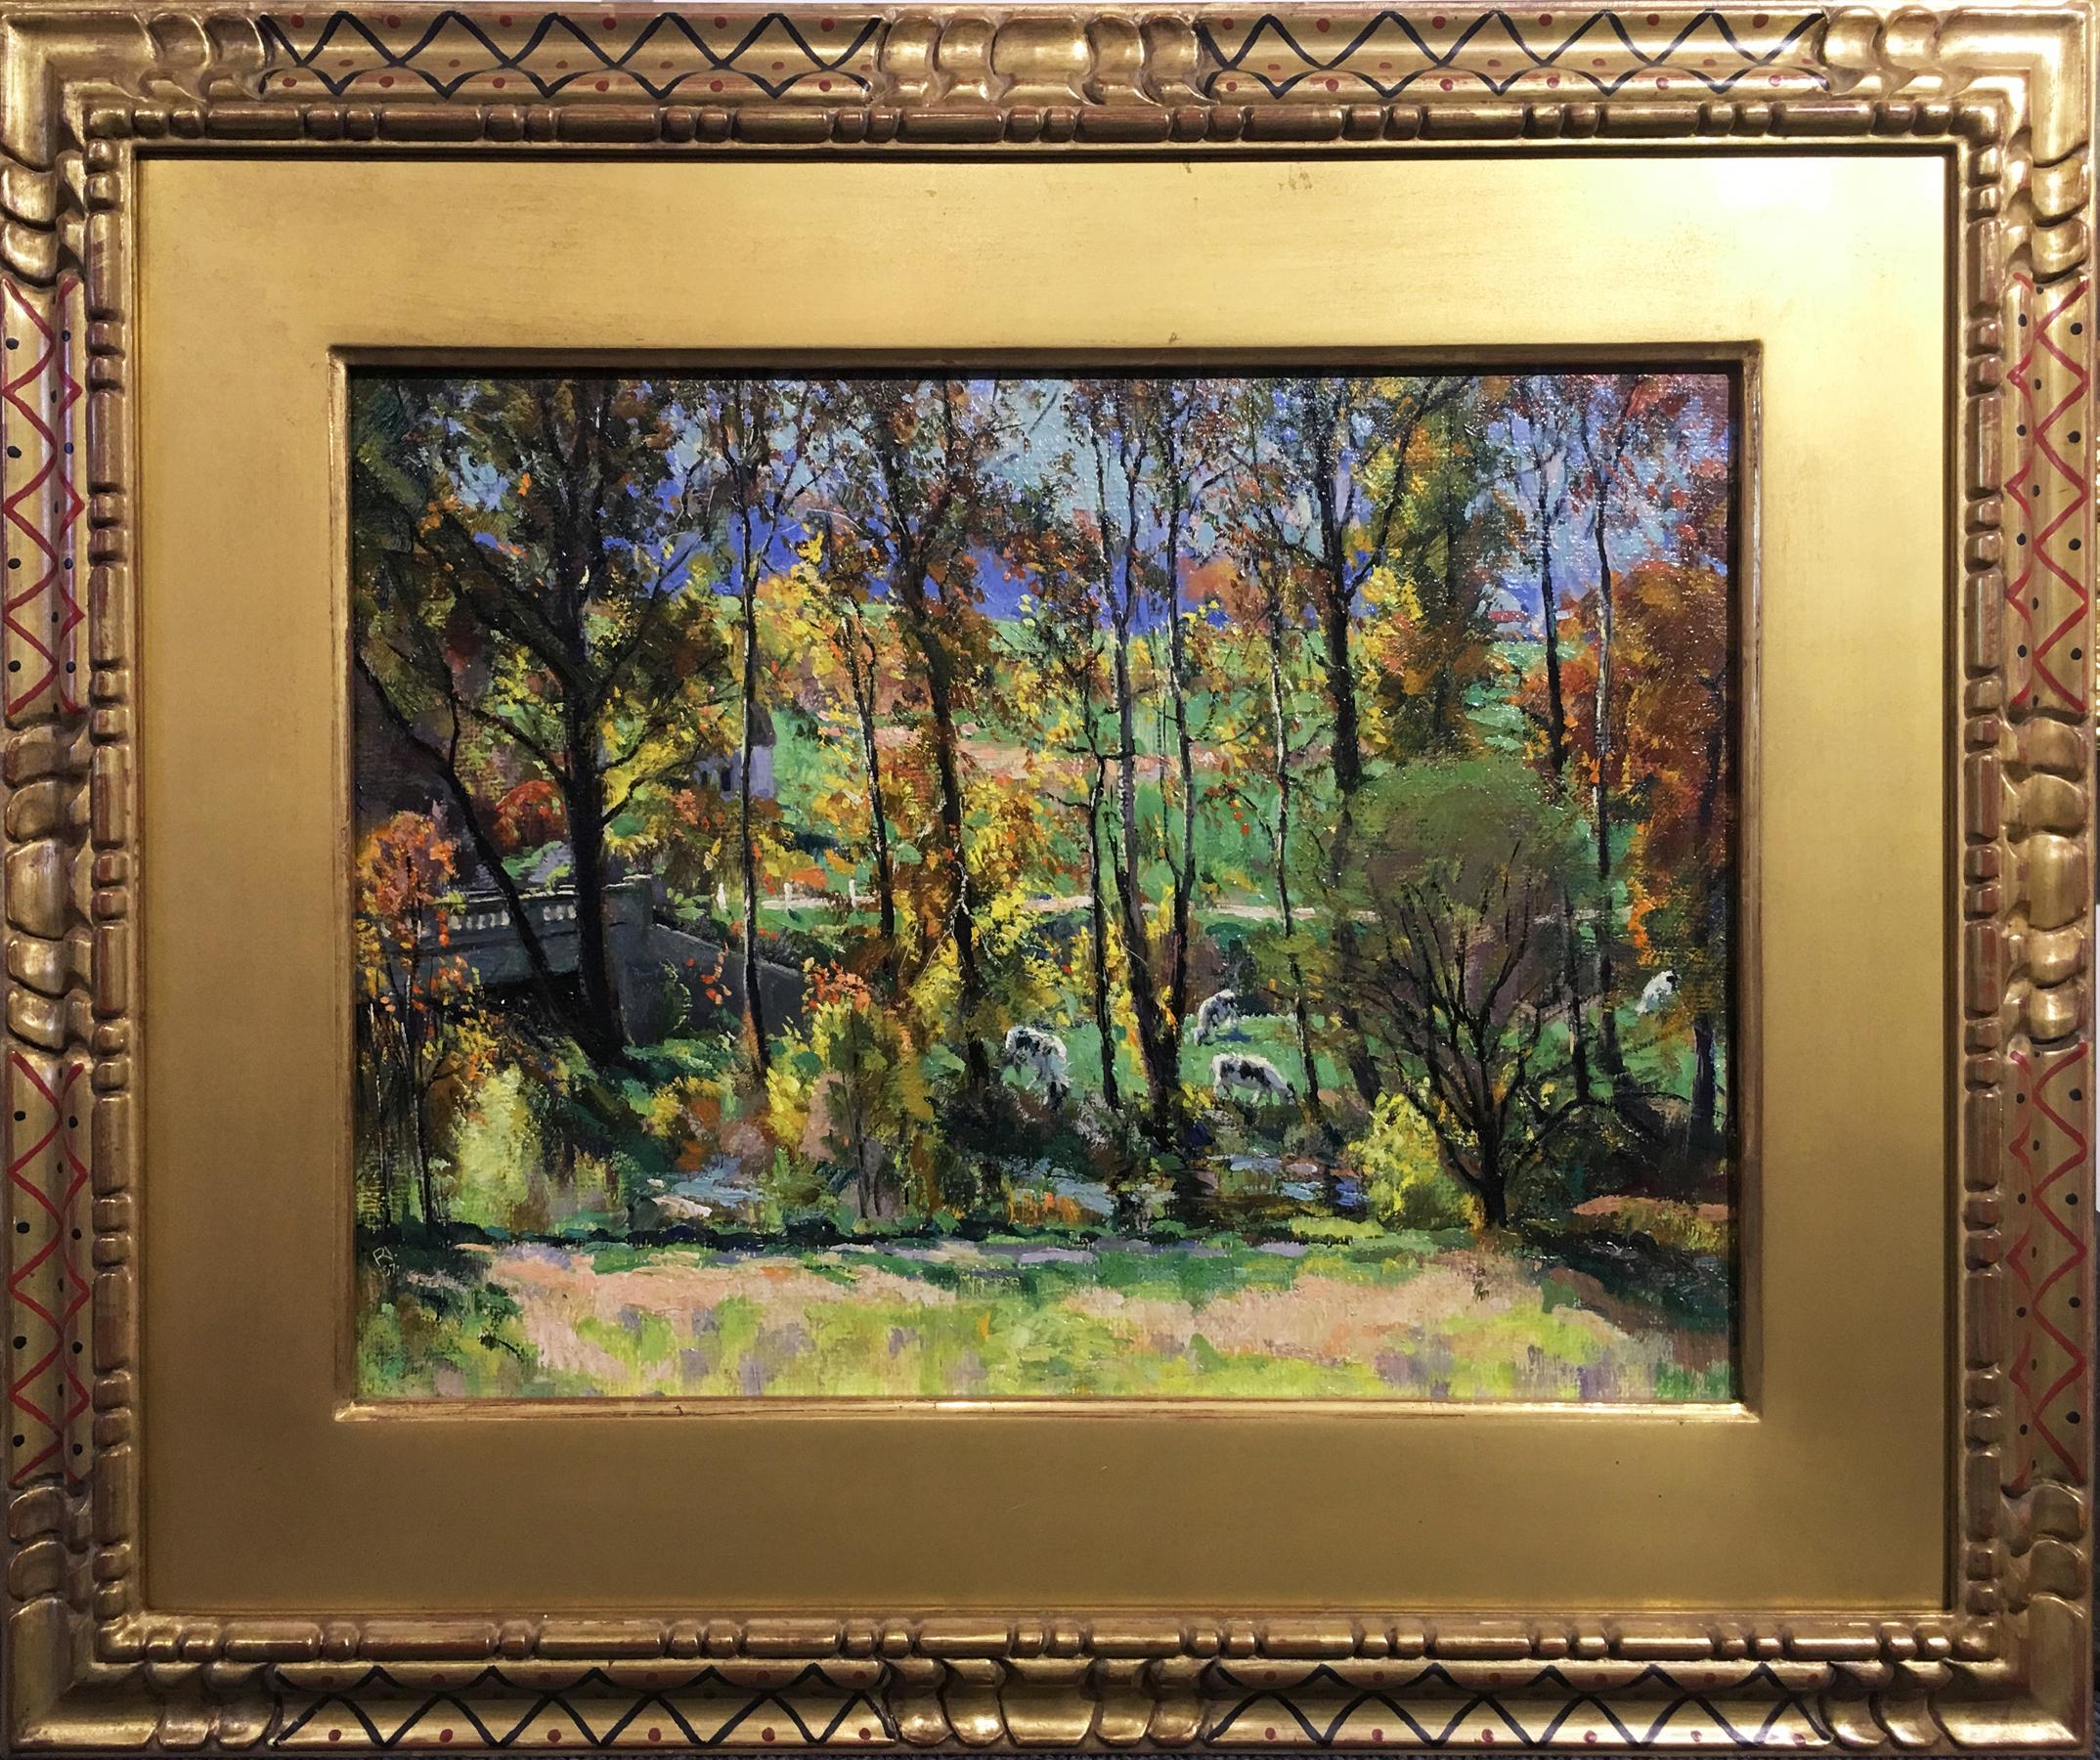 "Autumn Glory" by Roy Nuse is a 12" x 16" oil on board impressionist landscape painting. It comes from a private collection in New Hope, Pennsylvania and it is signed "RN" in the lower left corner. The back retains the original gallery label and the